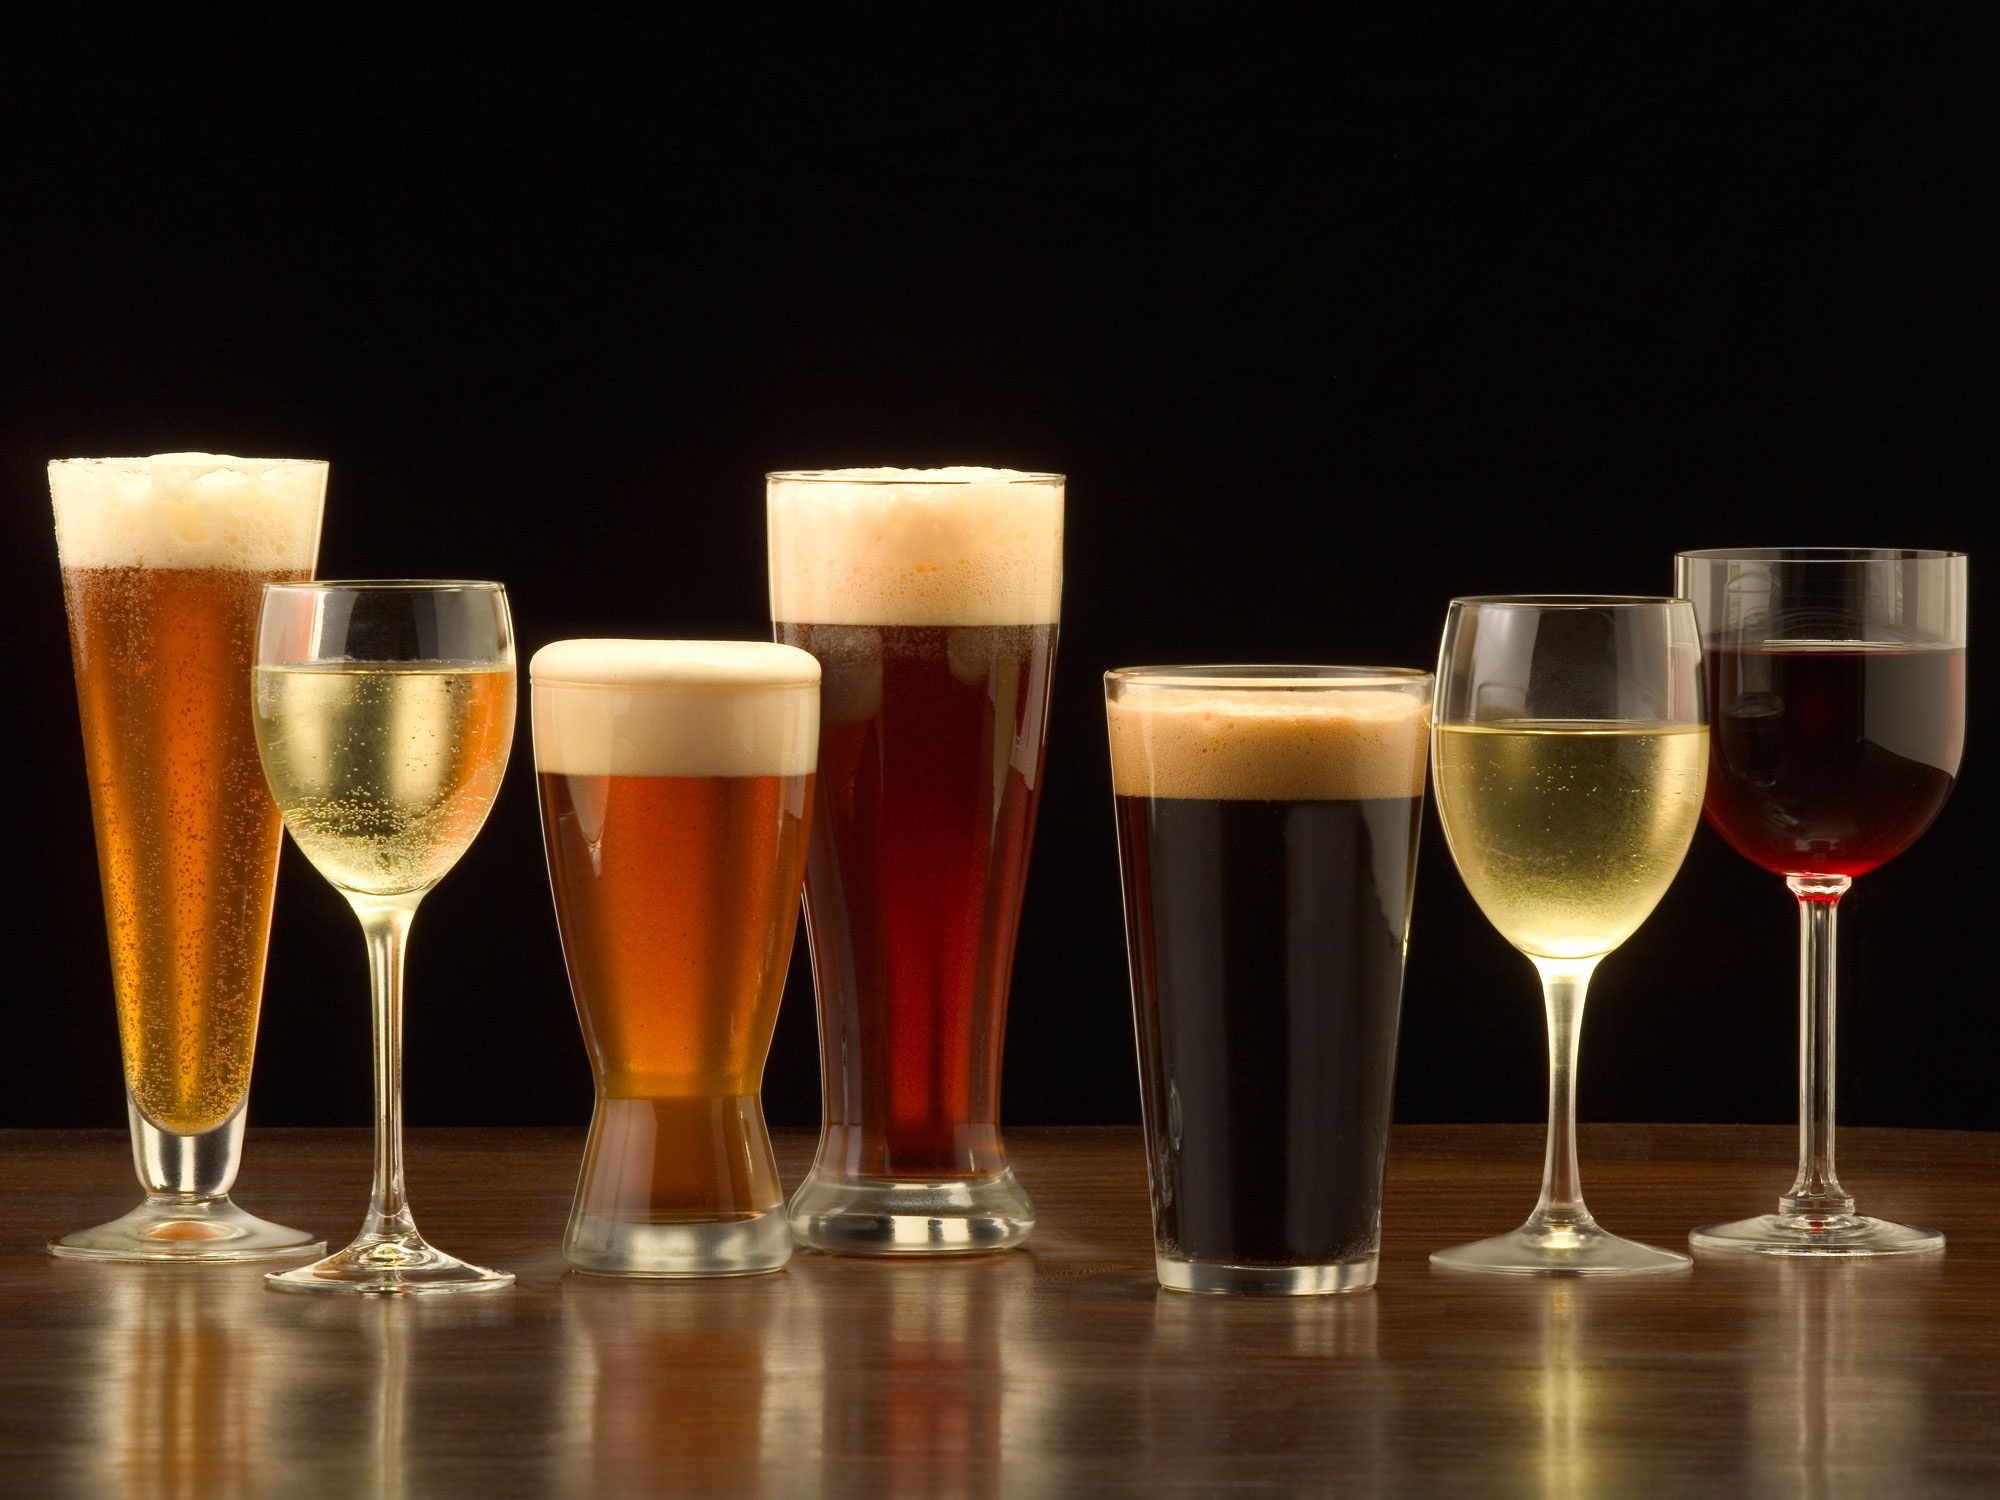 The toxin in beer and wine that could make teetotaling popular again